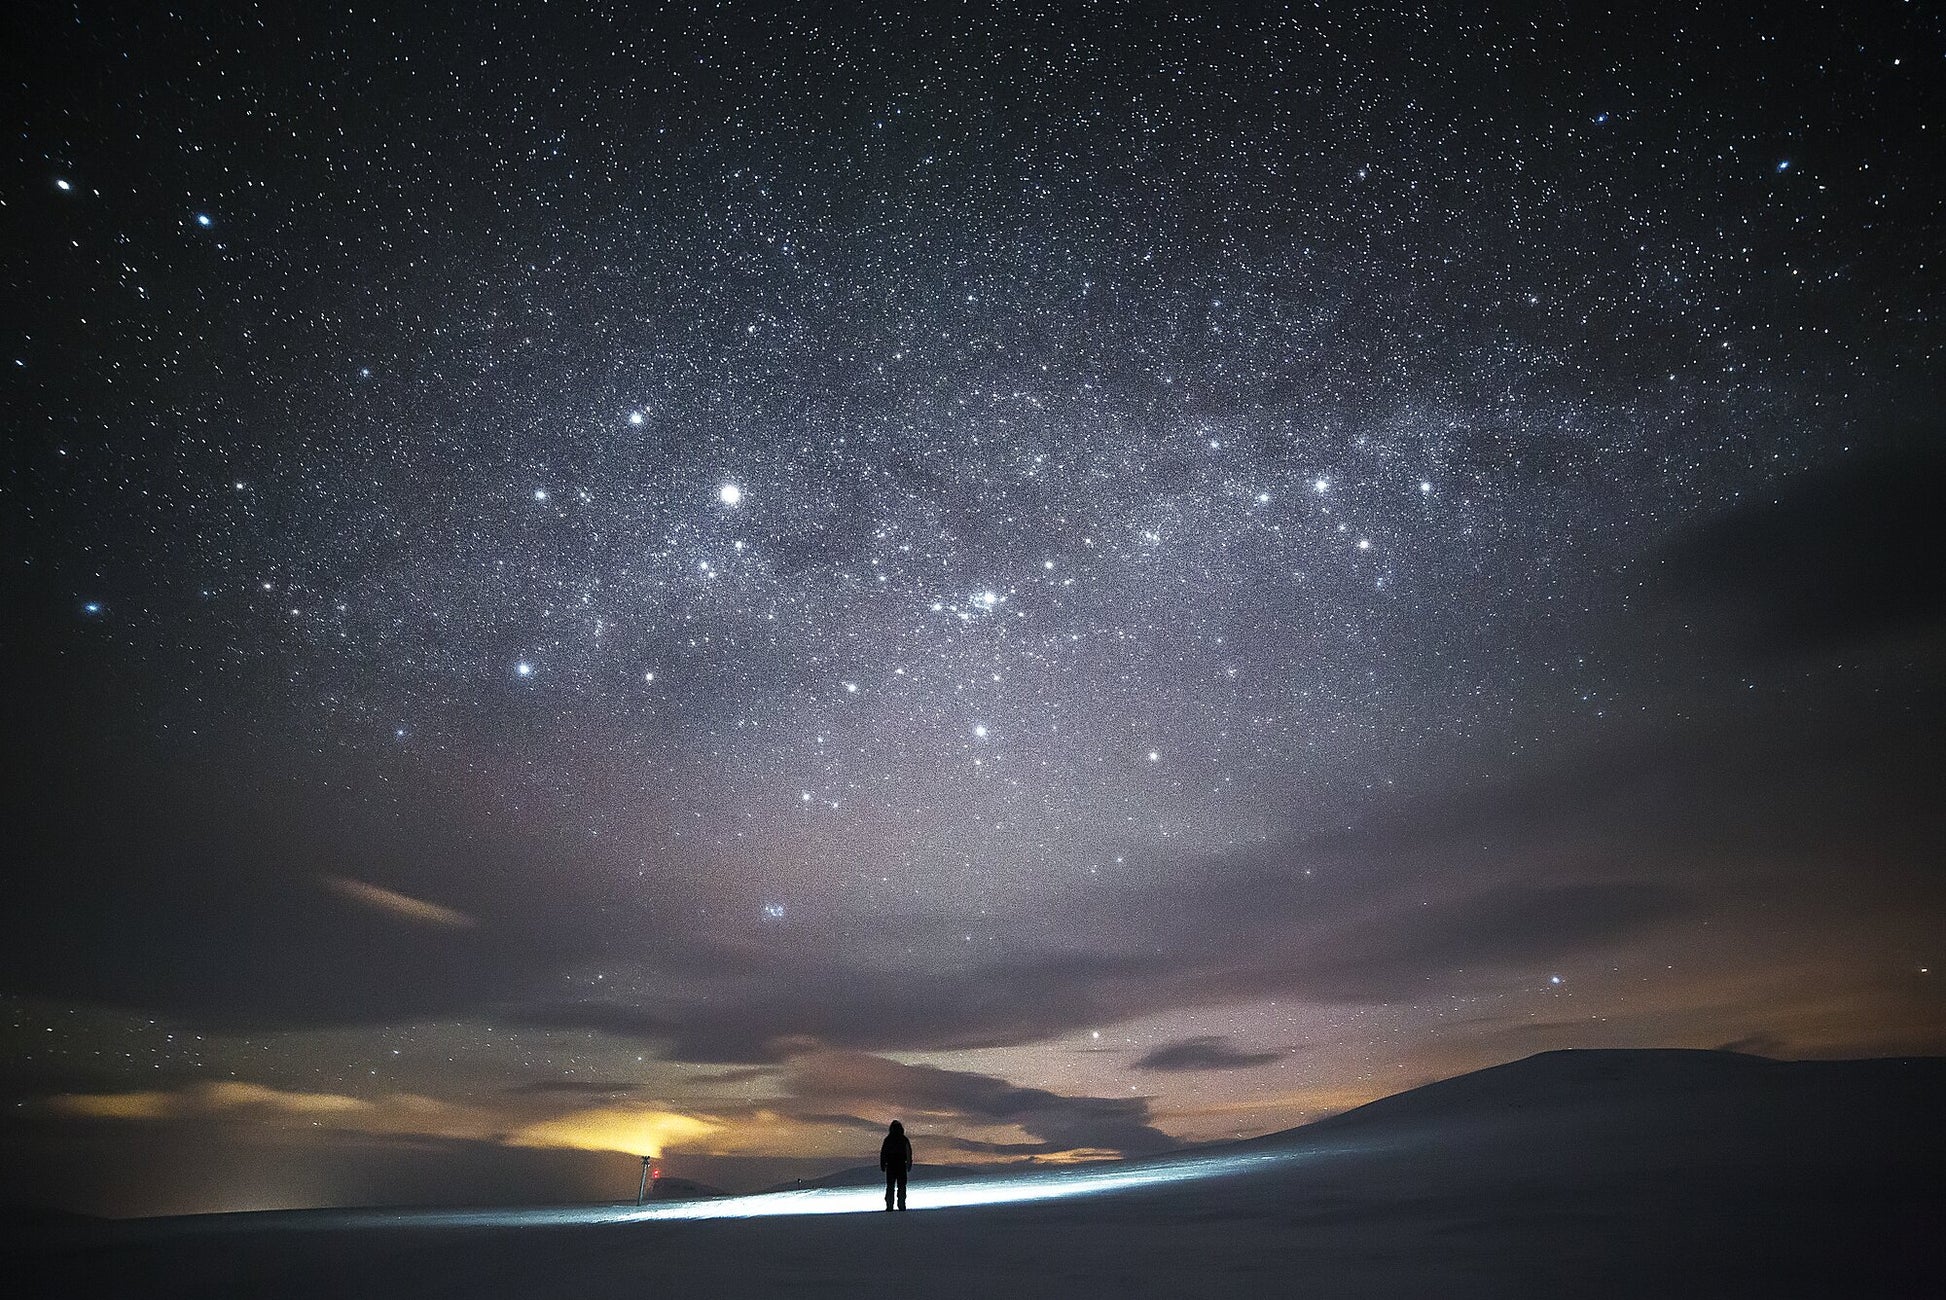 Person stargazing in Arctic wilderness during midwinter, vast night sky with twinkling stars.